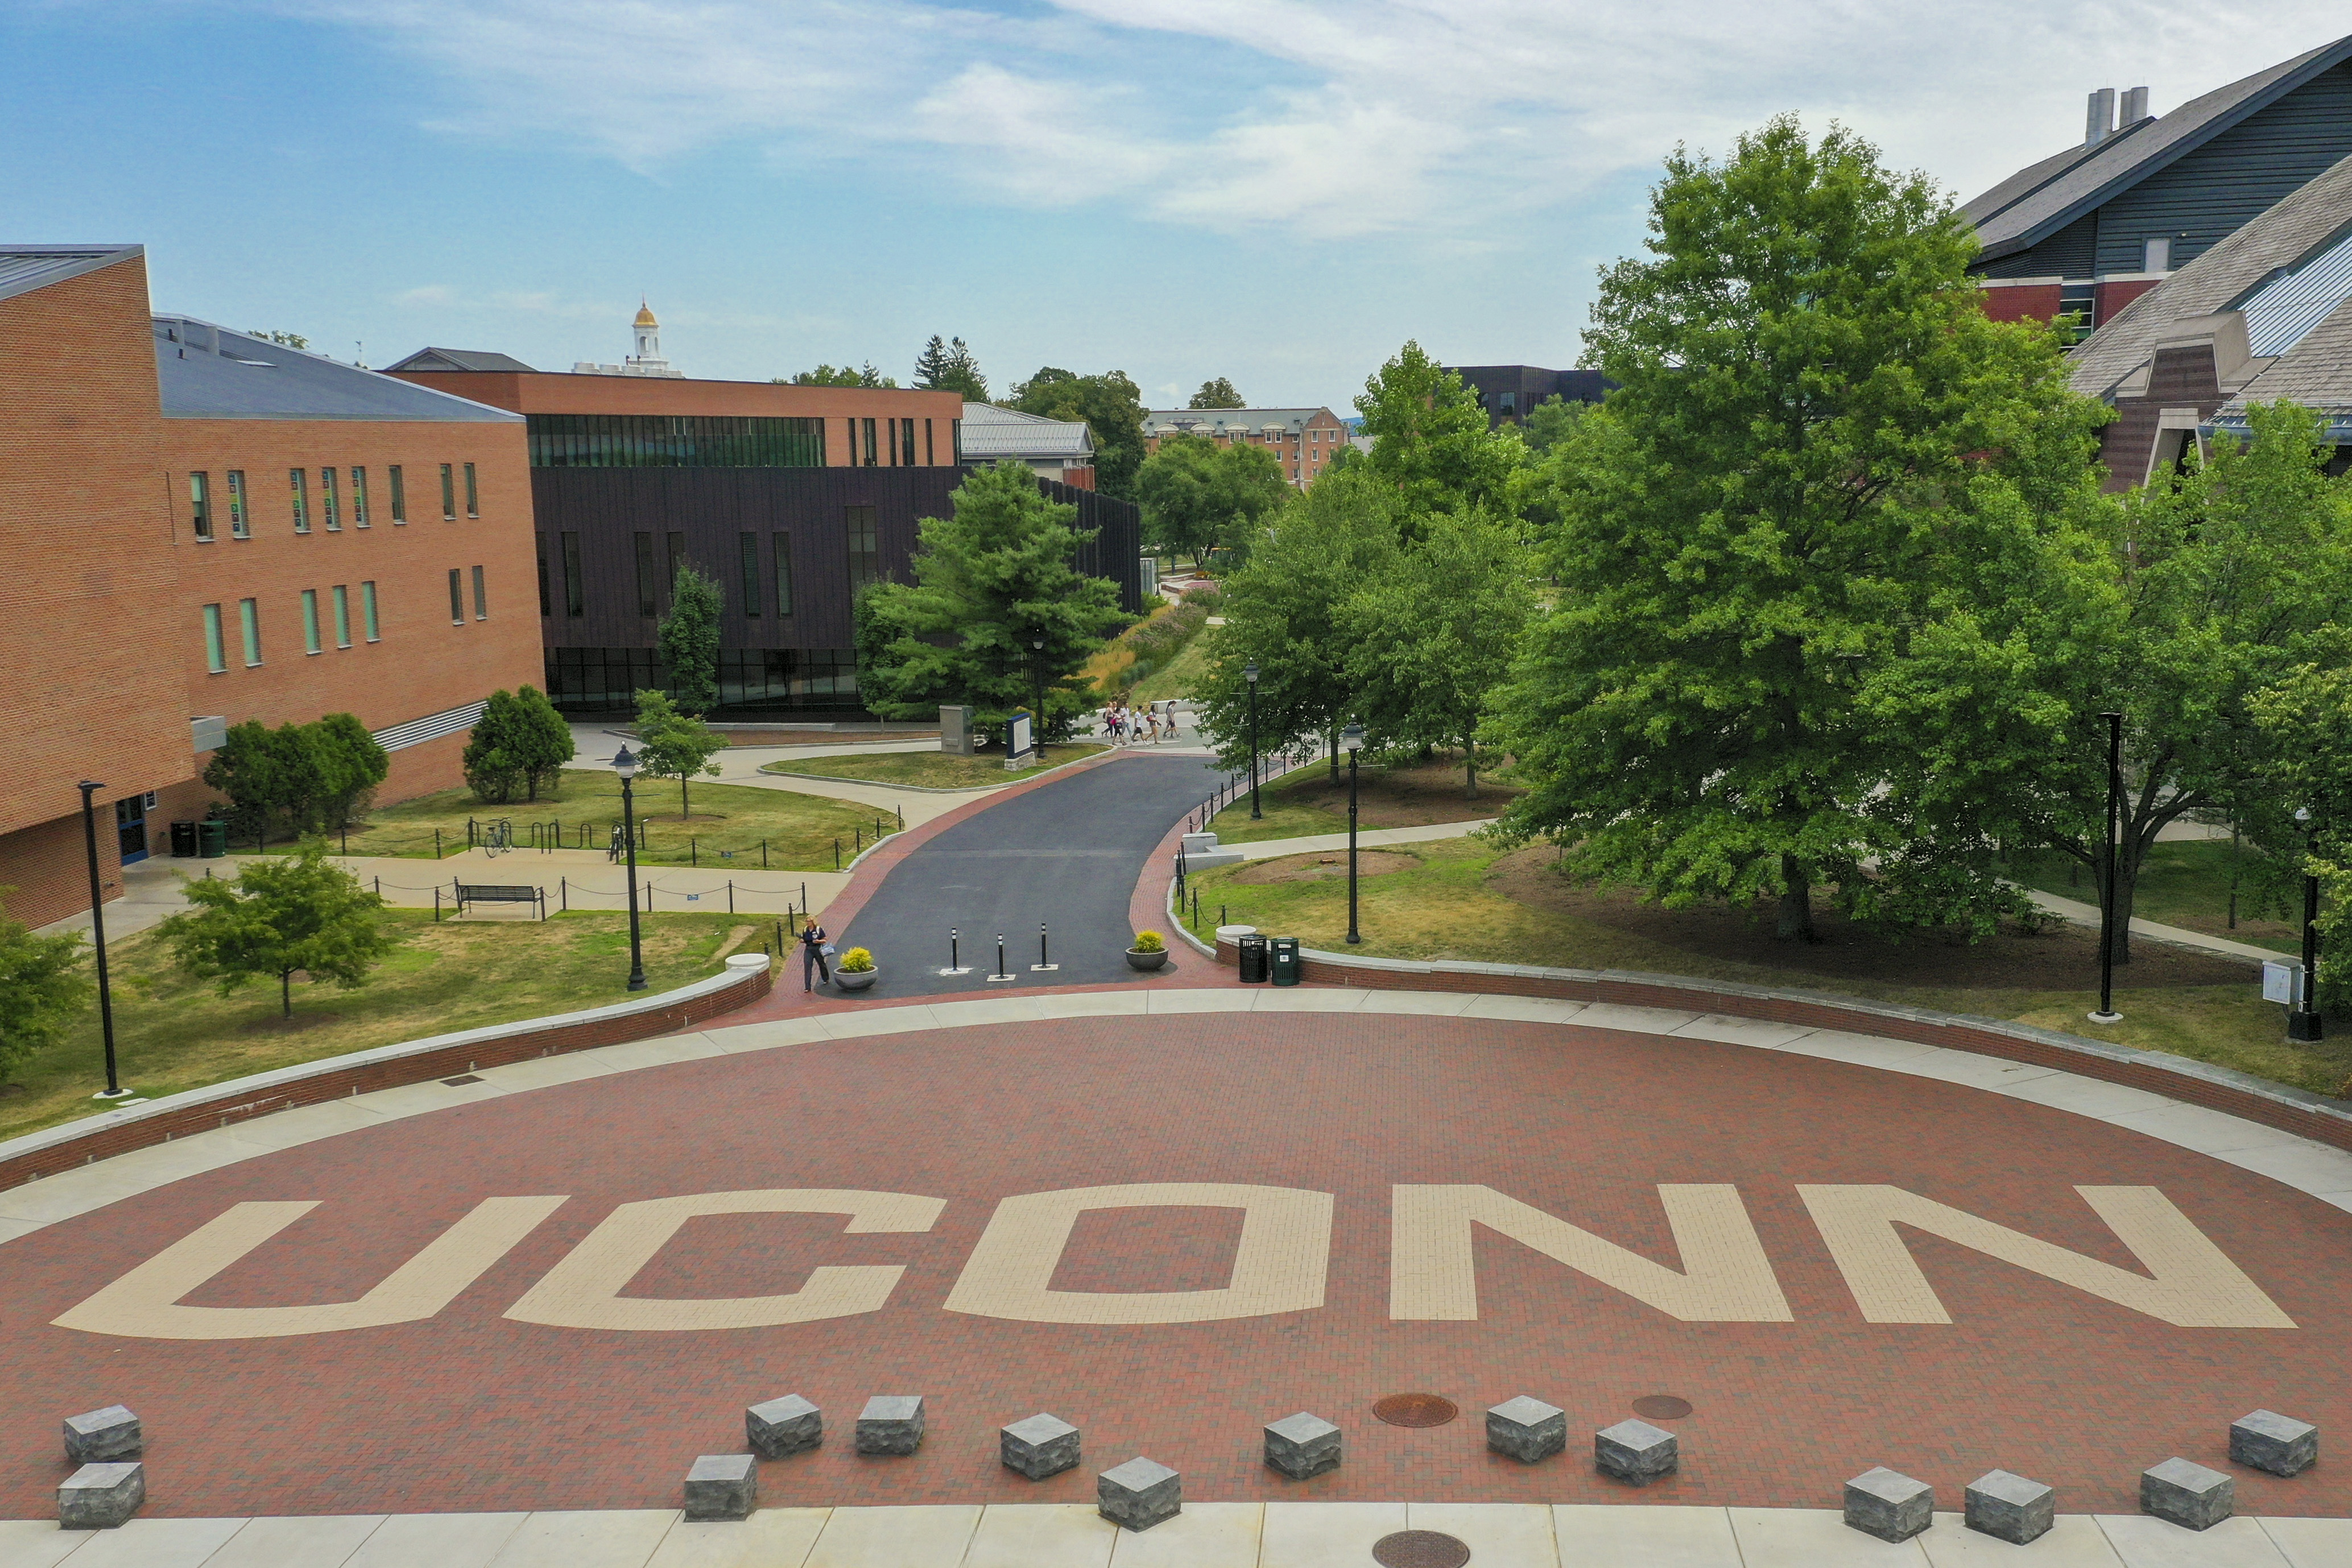 An aerial view of Fairfield Way, showing the word "UConn" spelled out in brick work.